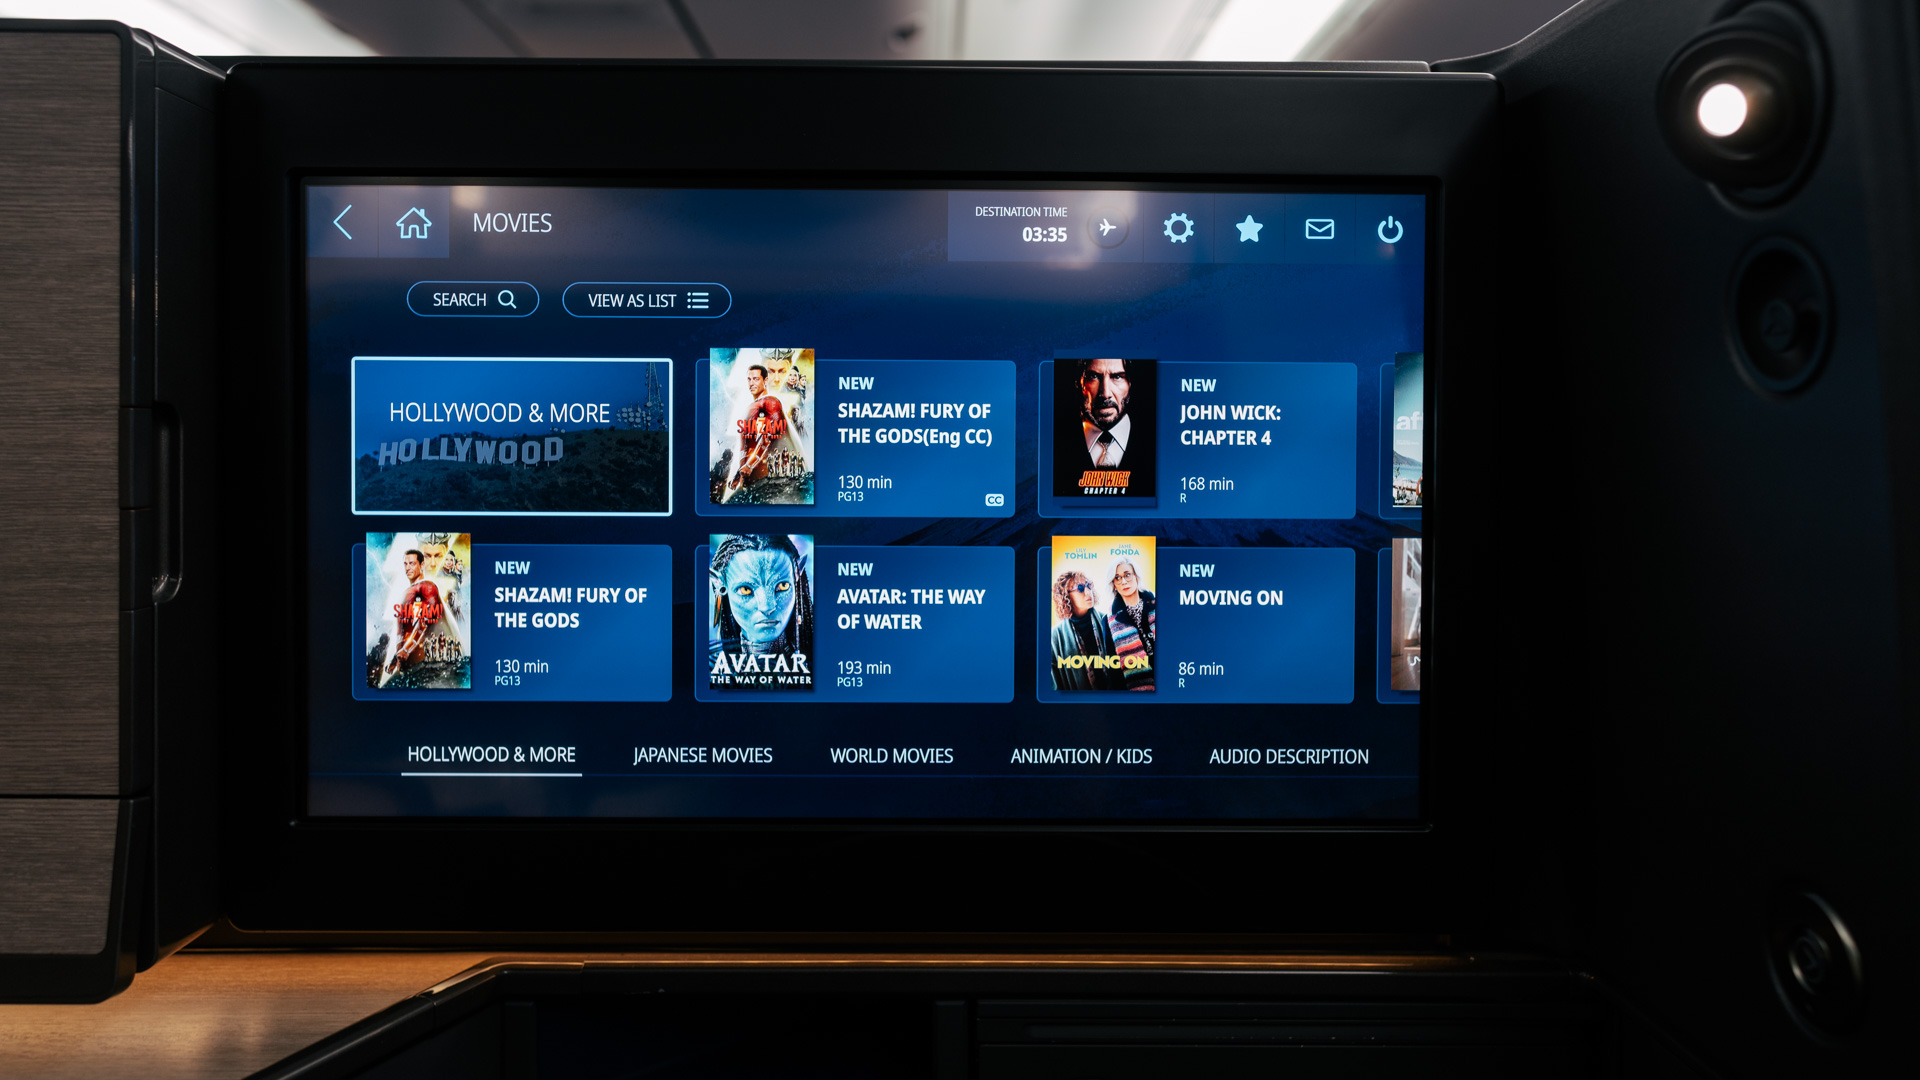 ANA Boeing 777 Business Class movies